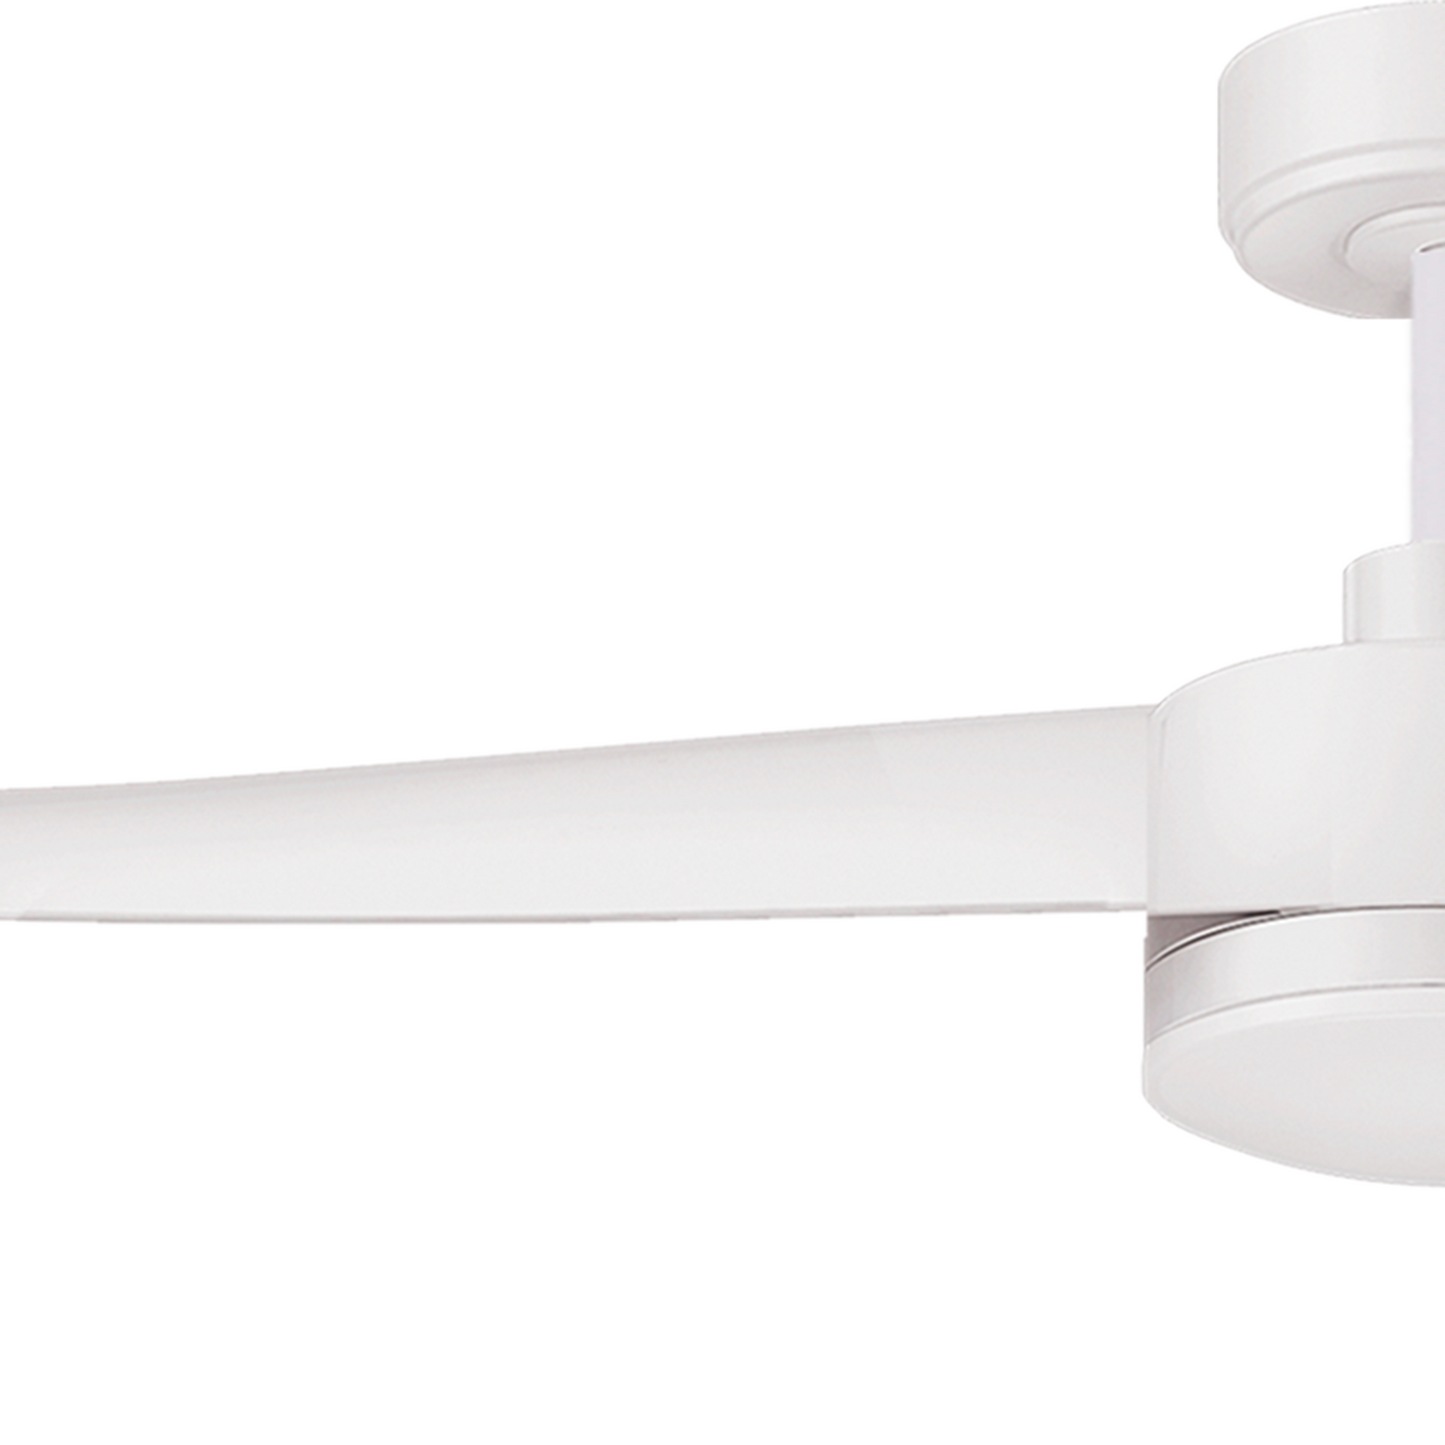 52 Inch Smart Ceiling Fan with Voice, App, and Remote Control YJ662-52-W-2